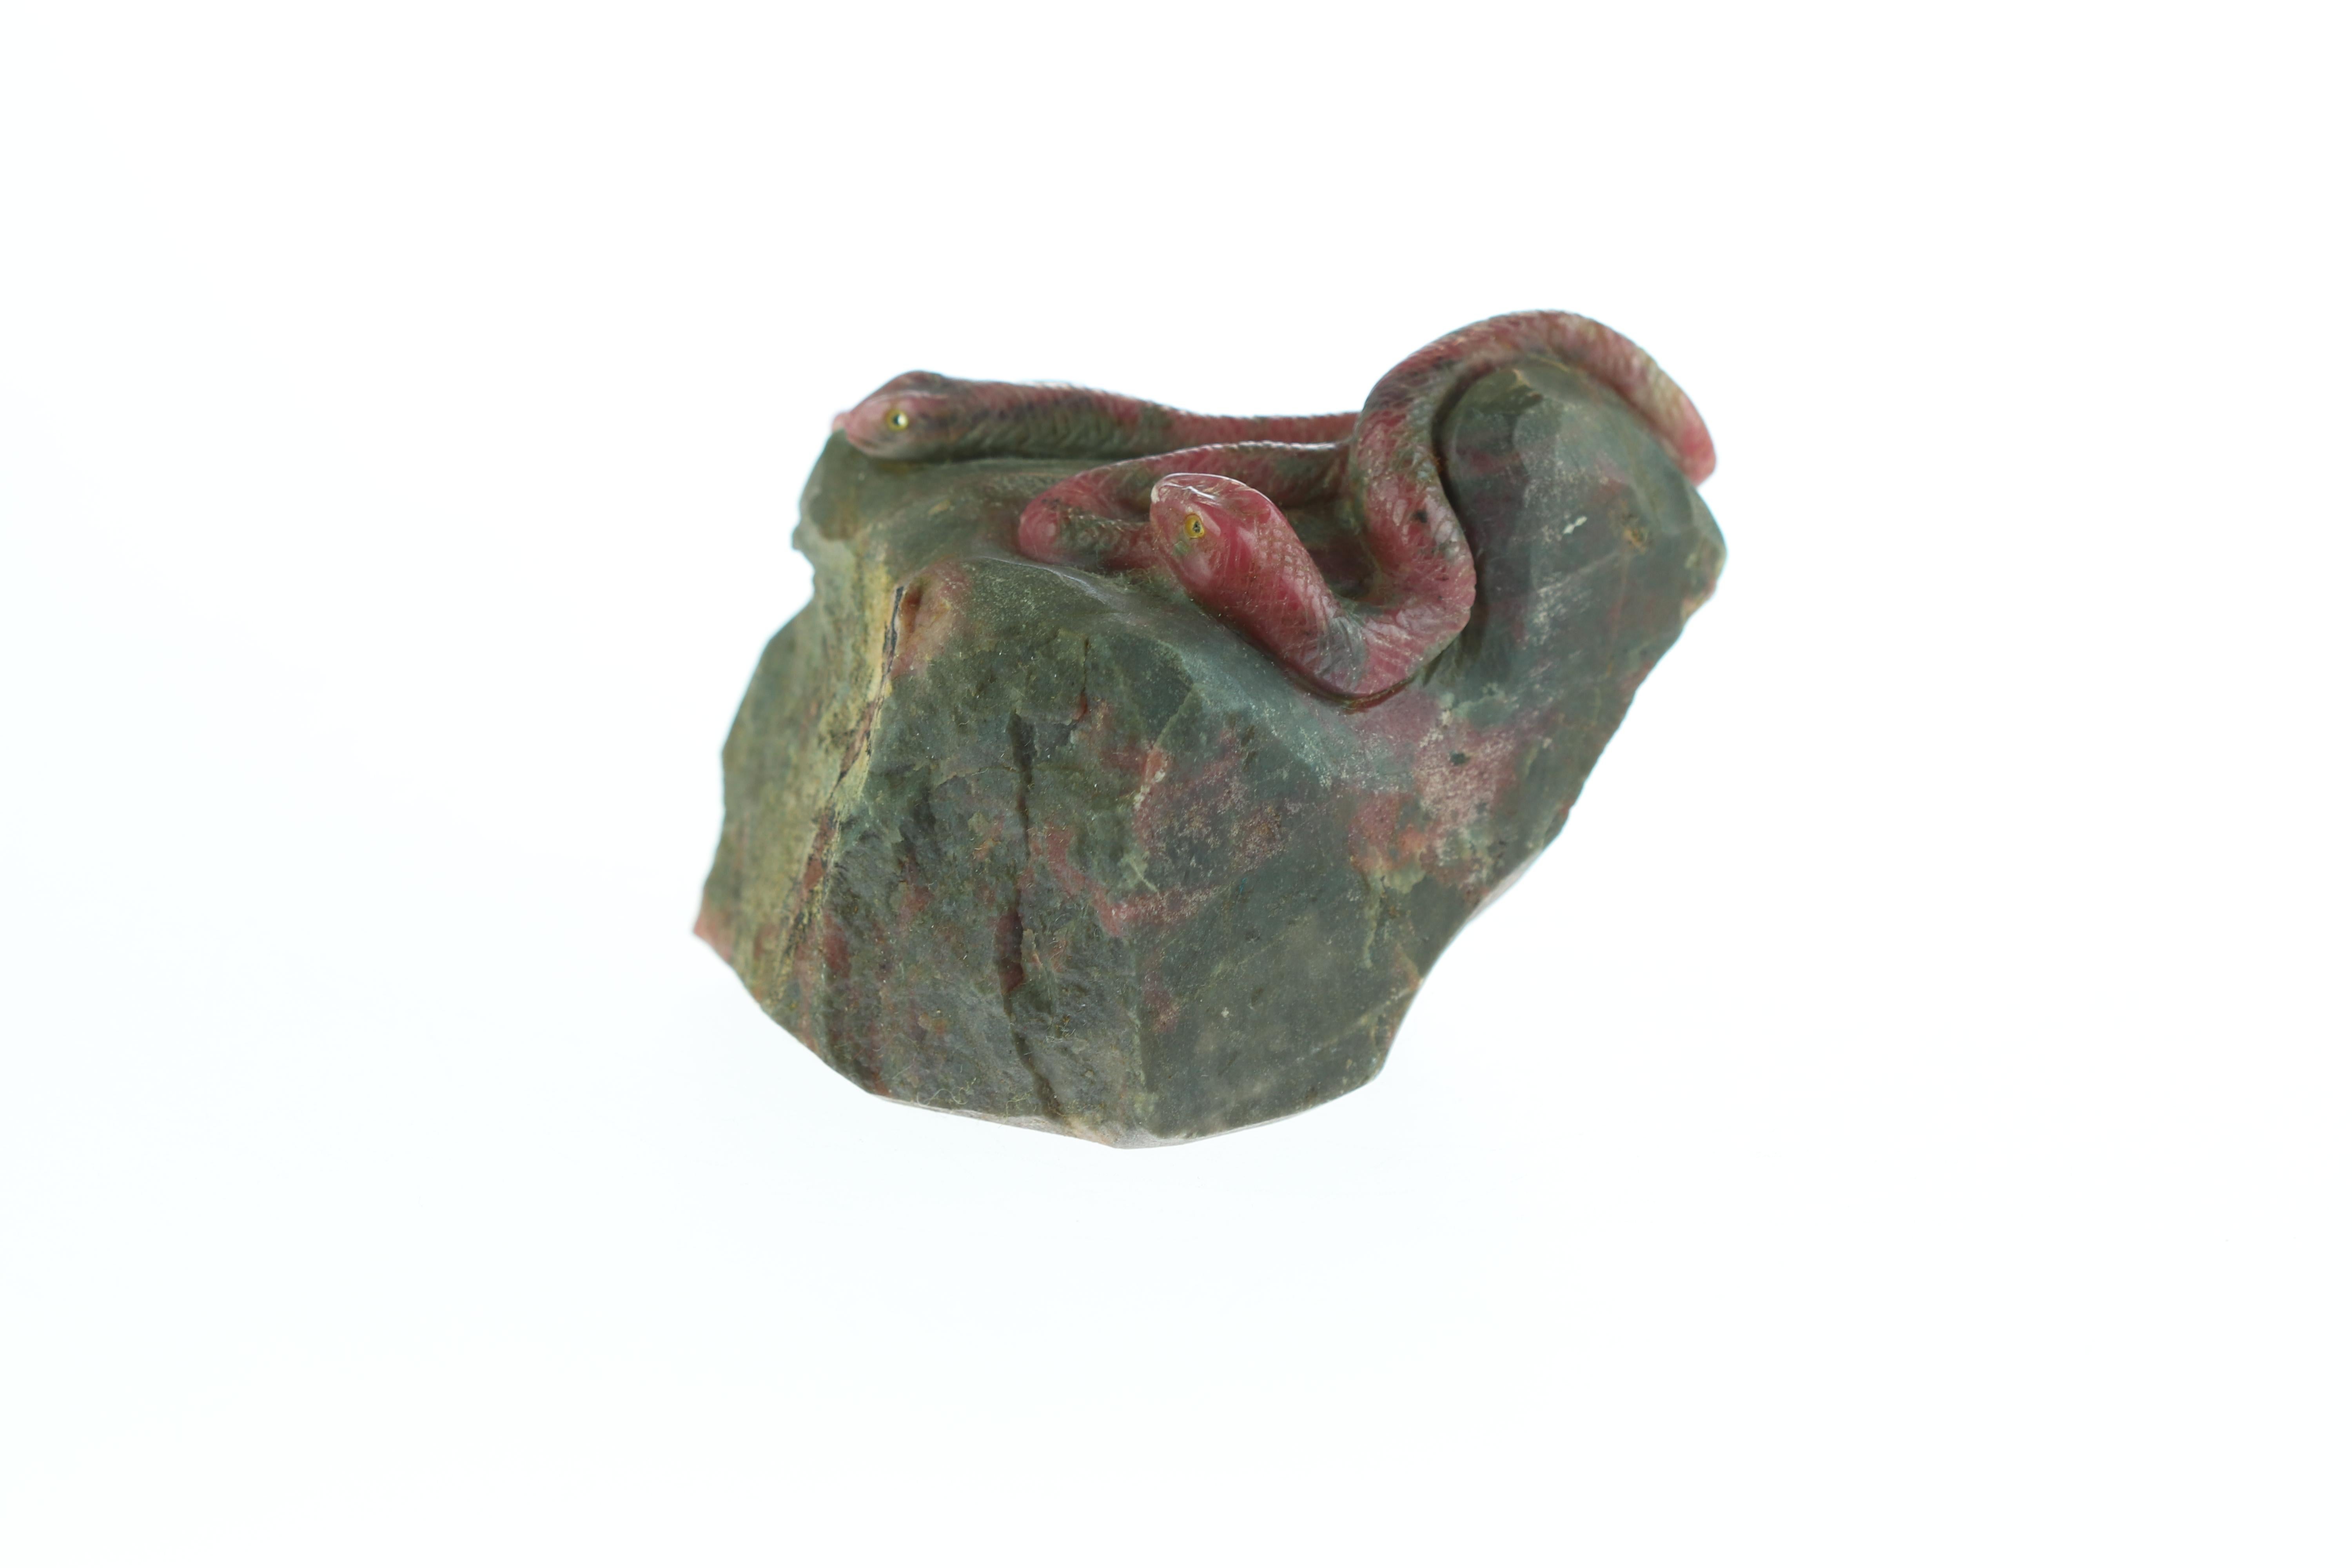 Chinese Export Rhodochrosite Snake Frog Figurine Carved Animal Artisanal Chinese Sculpture For Sale